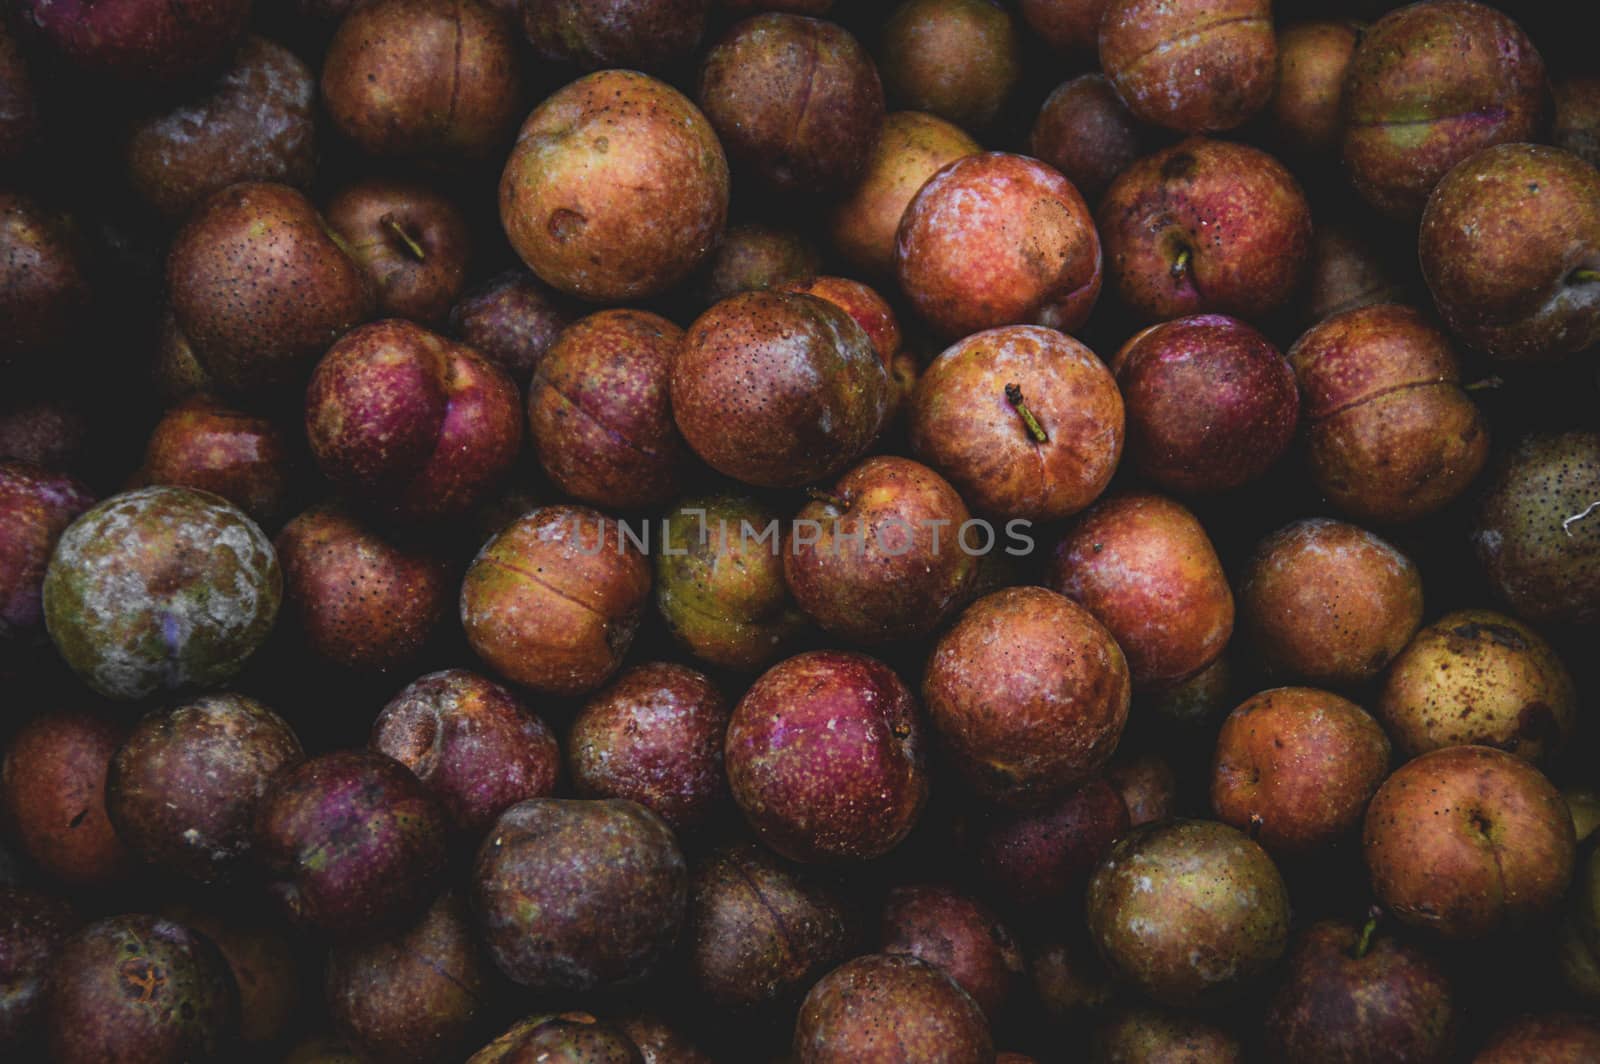 Wild crab apples by Sonnet15